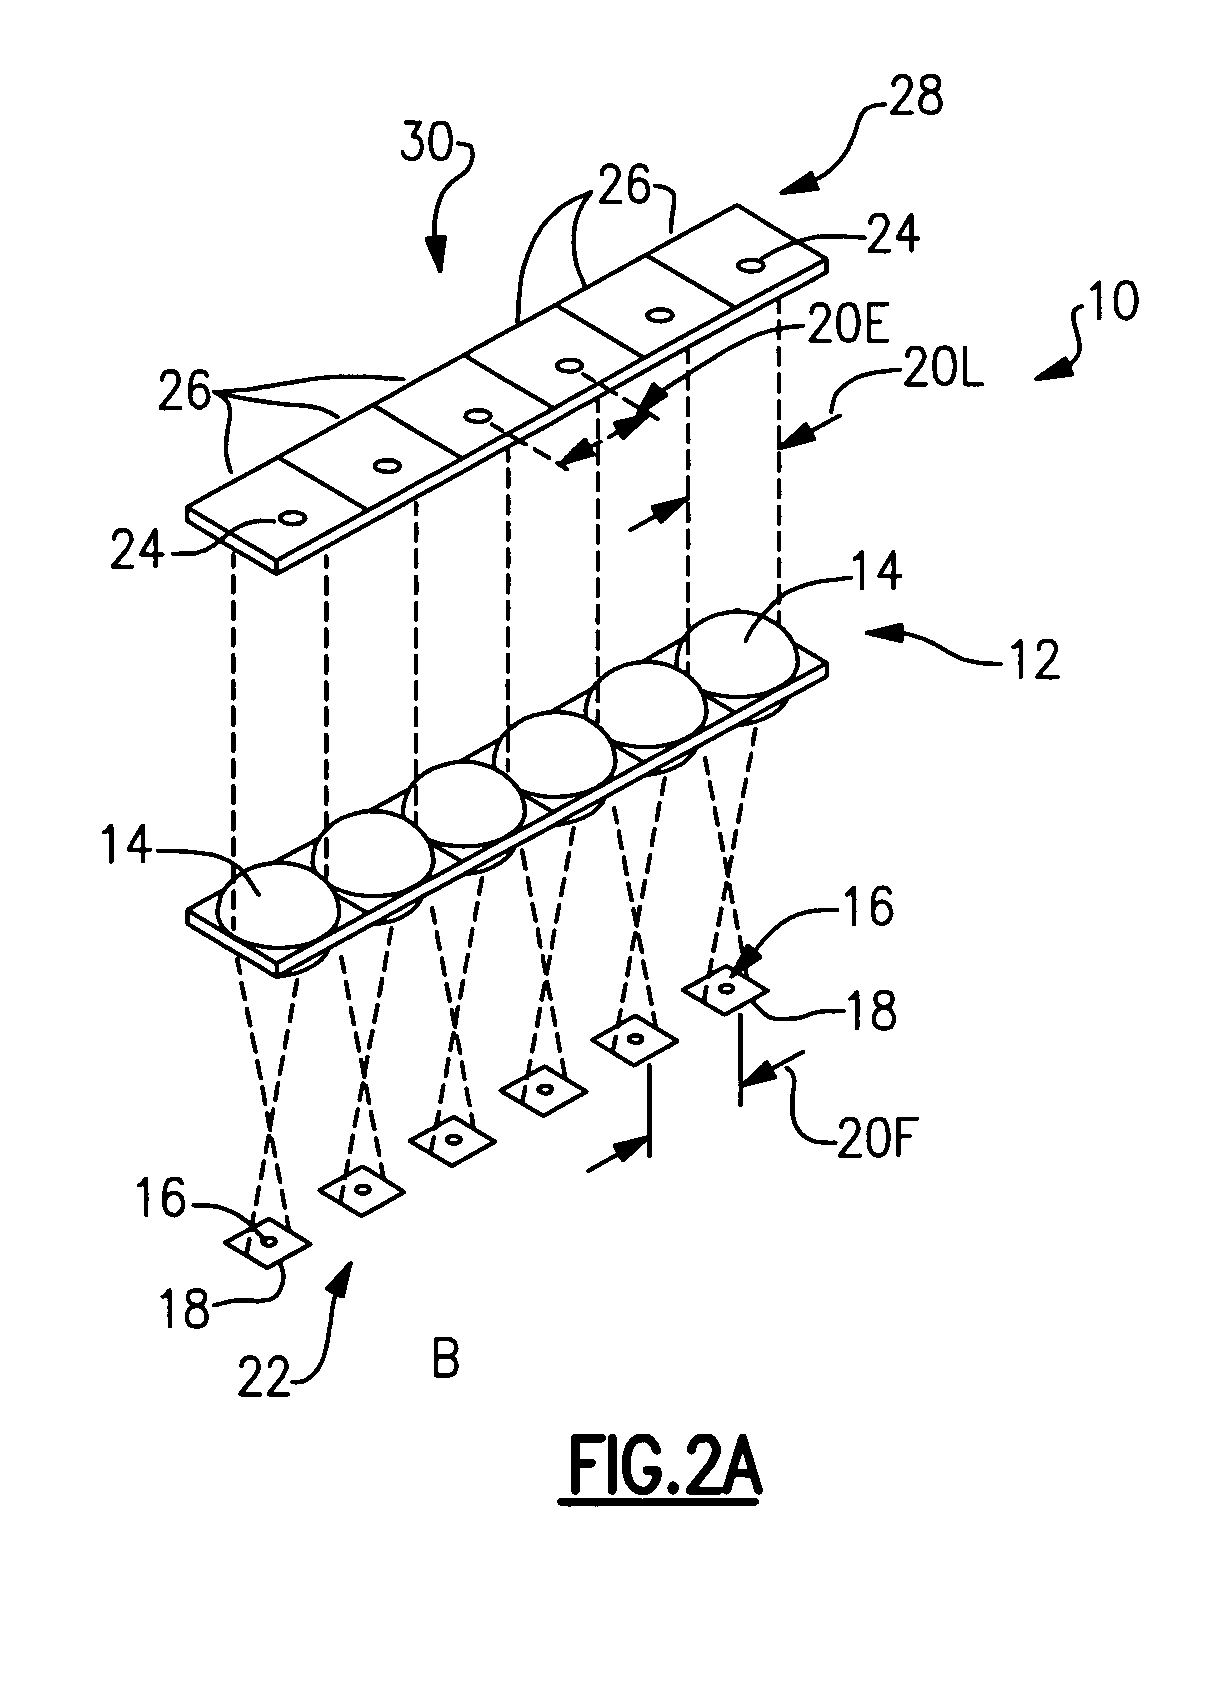 Apparatus and methods for the inspection of microvias in printed circuit boards